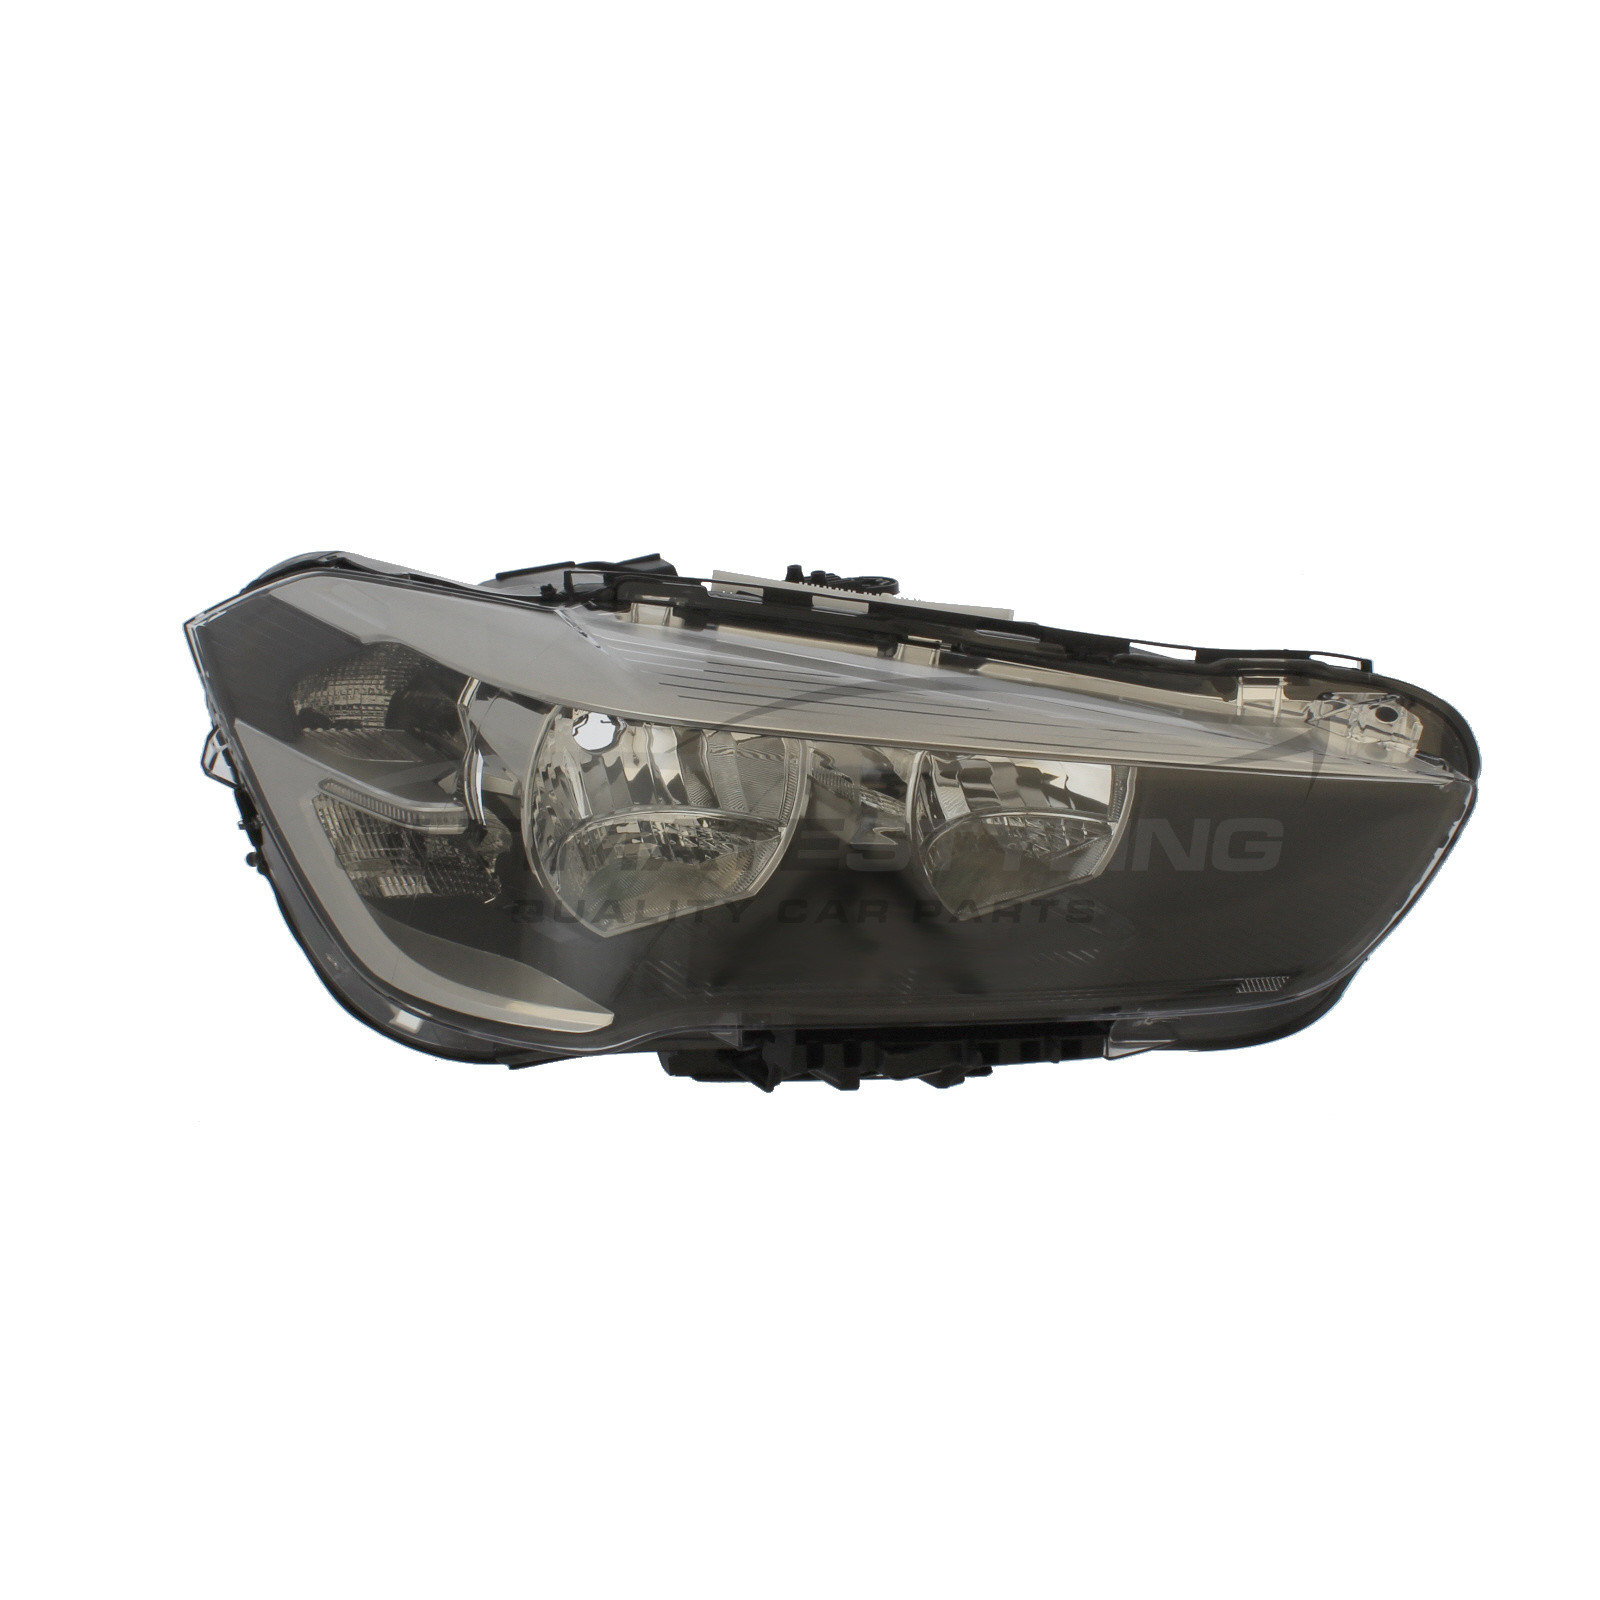 BMW X1 2015-2020 Halogen With LED Daytime Running Lamp, Electric With Motor, Black Headlight / Headlamp Drivers Side (RH)